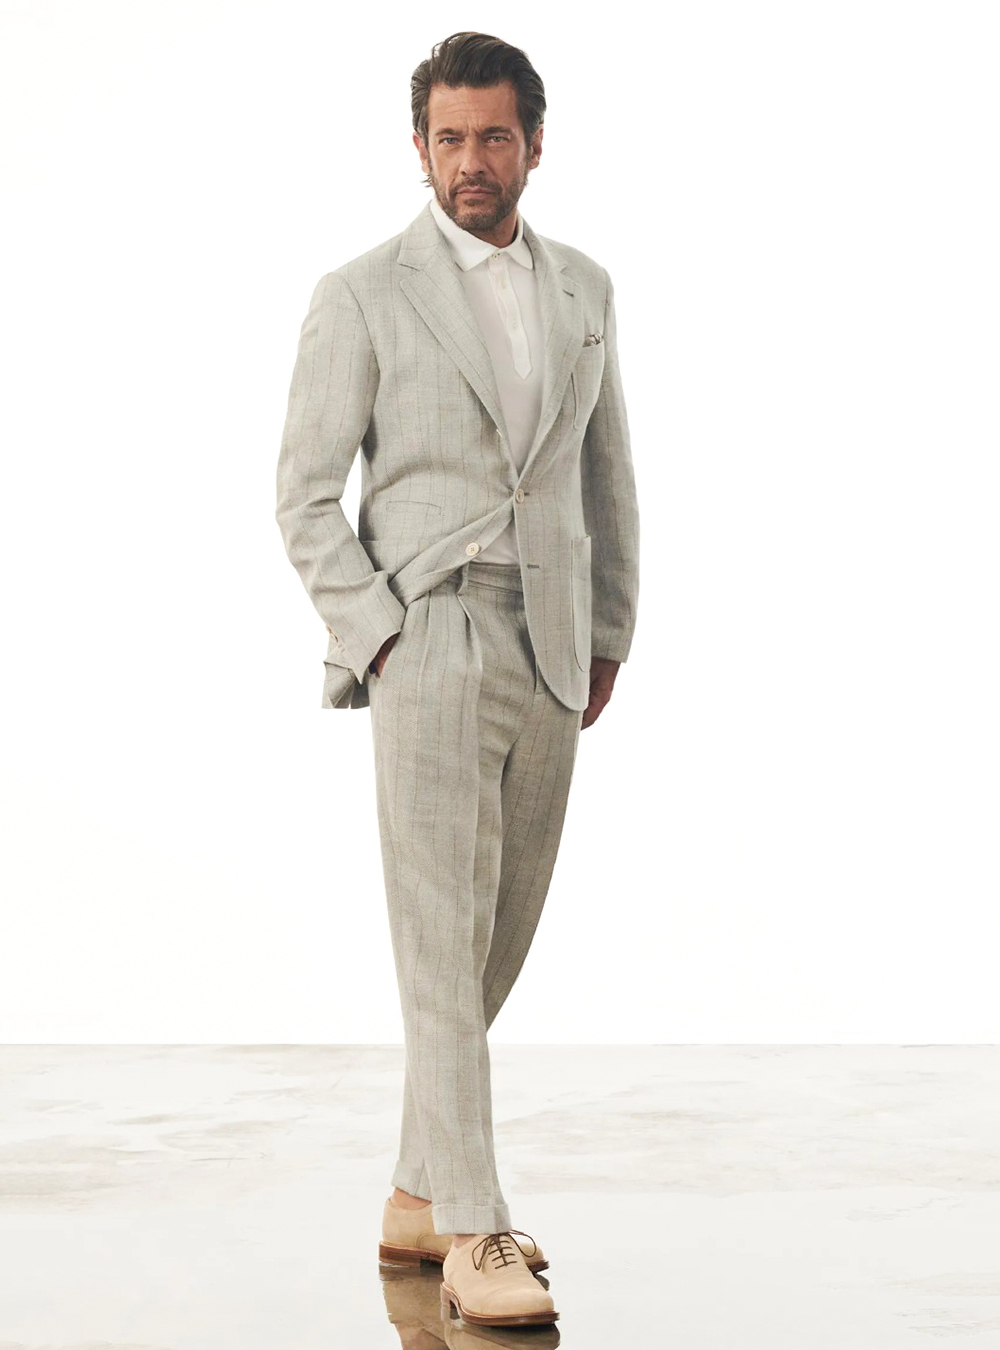 Light grey suit, white t-shirt and beige suede oxford shoes